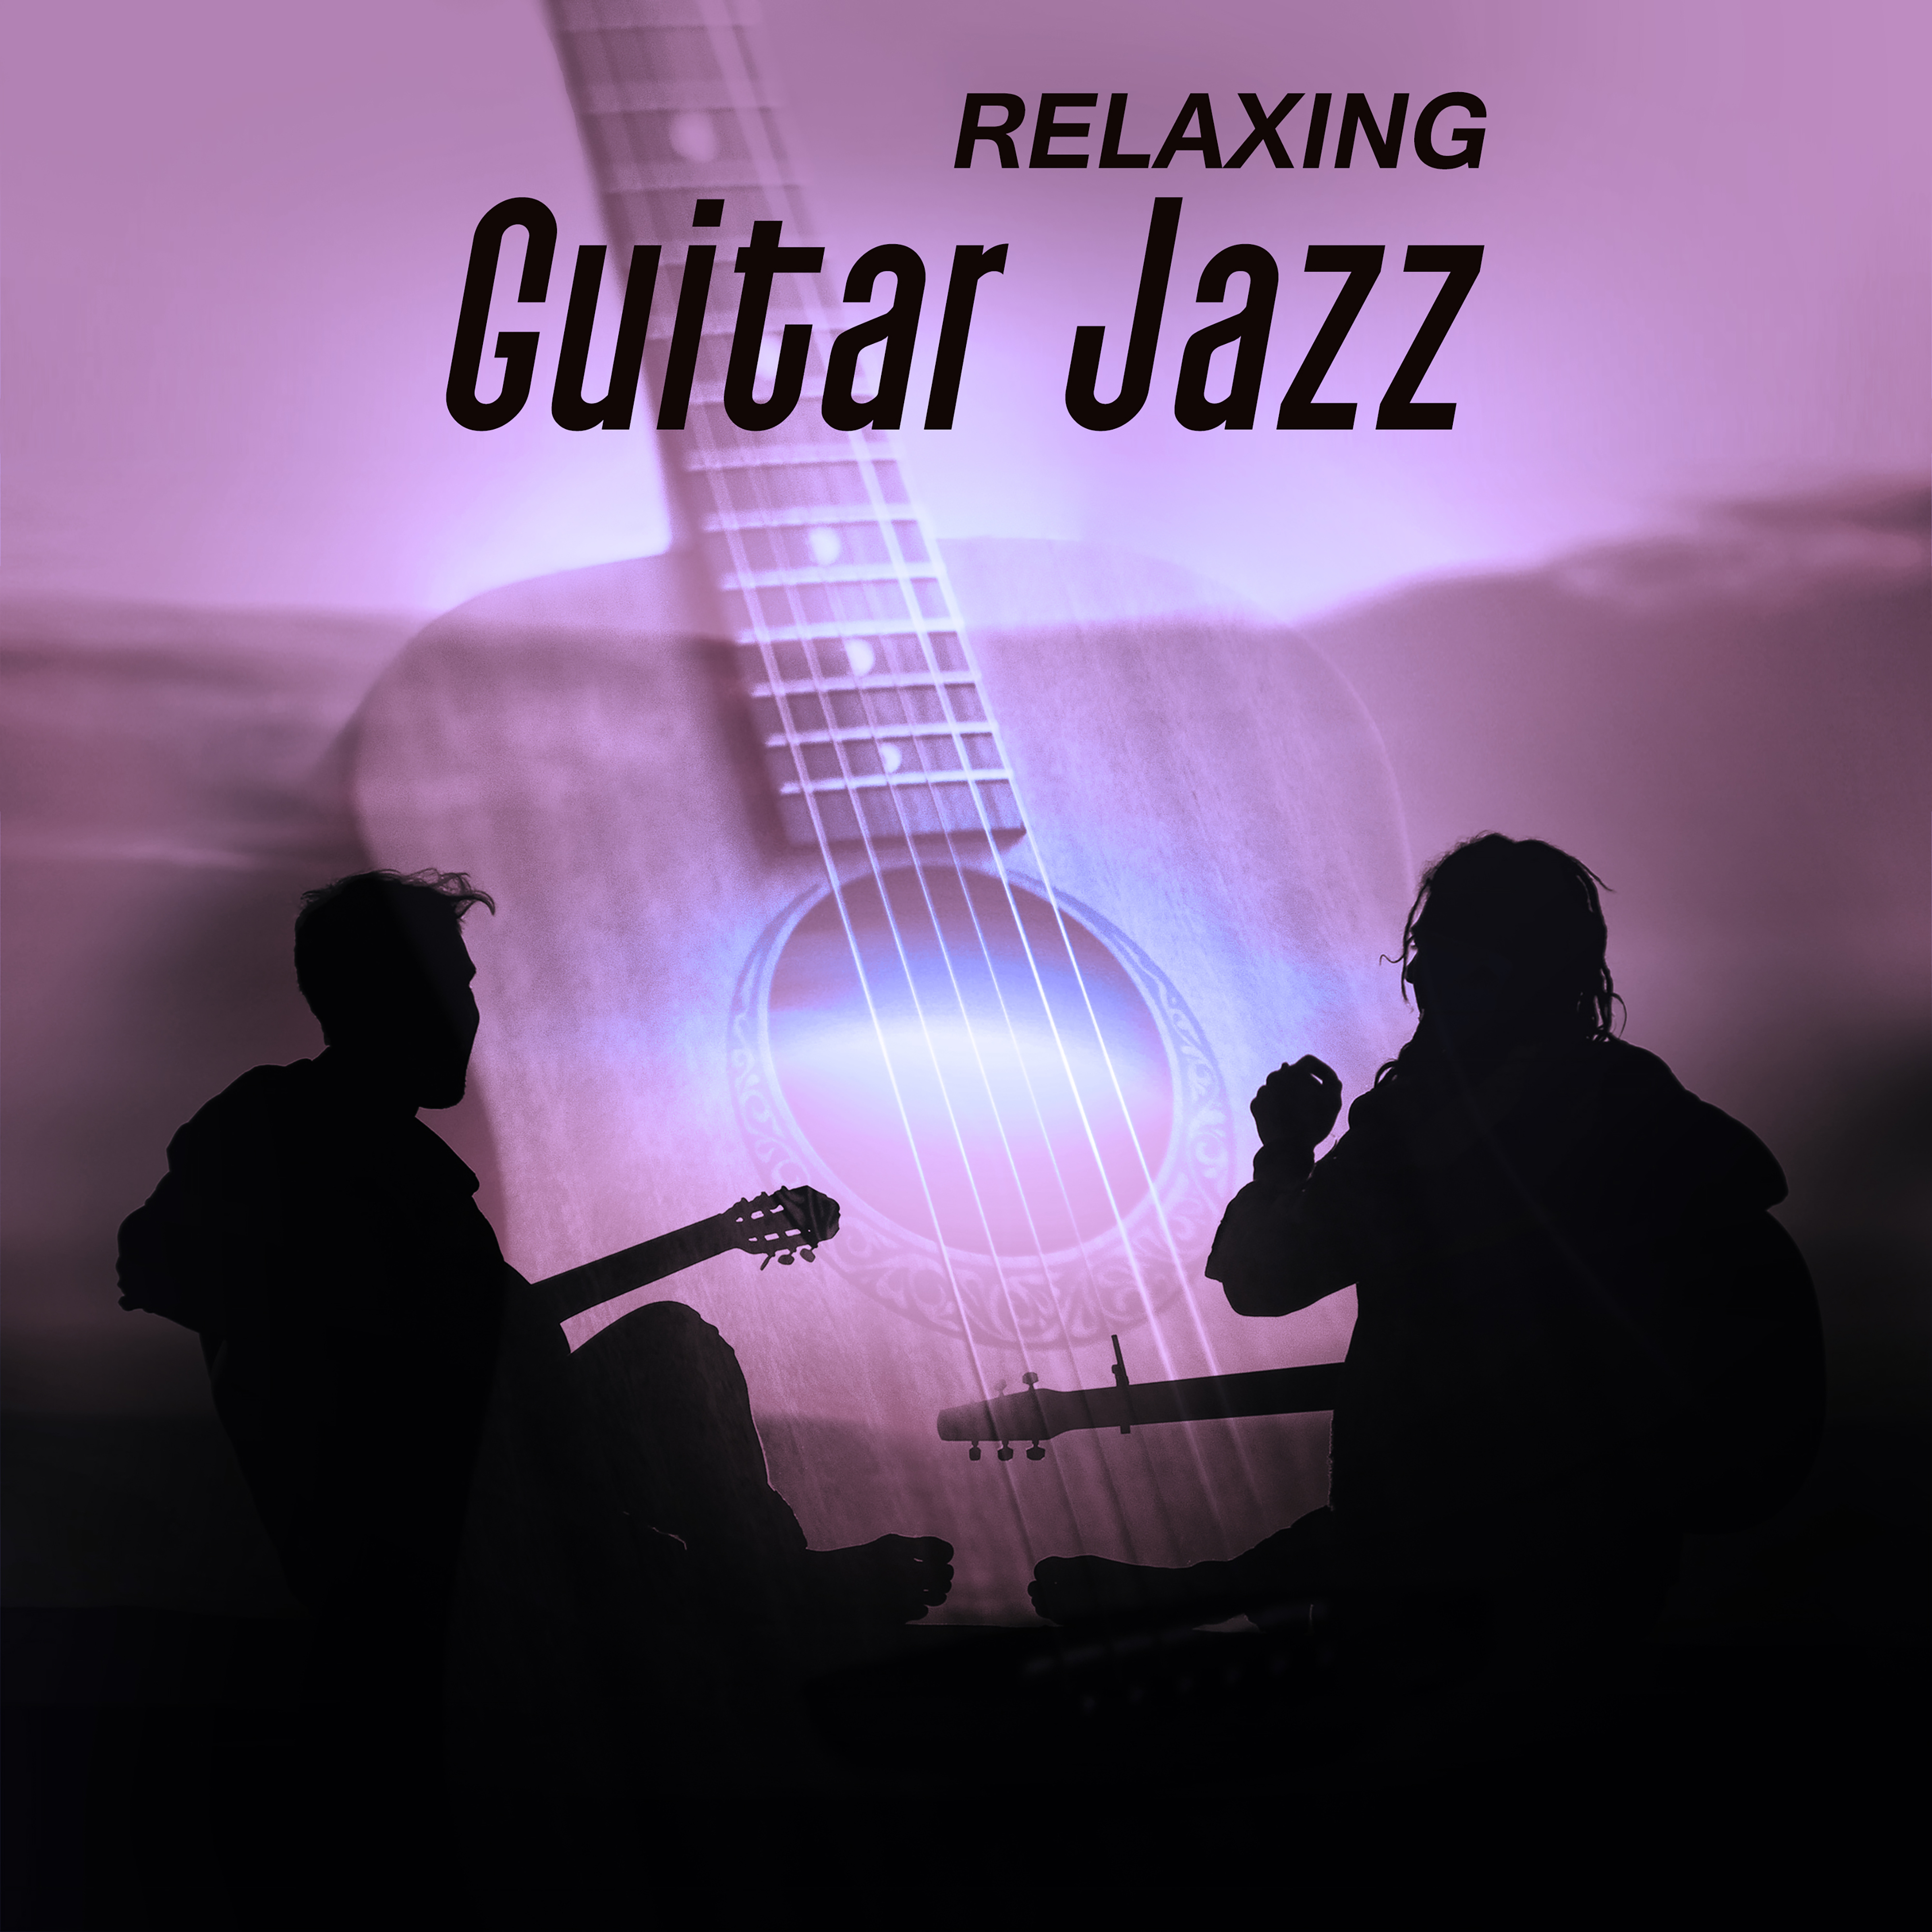 Relaxing Guitar Jazz  Soft Sounds to Relax, Rest with Beautiful Melodies, Relaxing Jazz Music